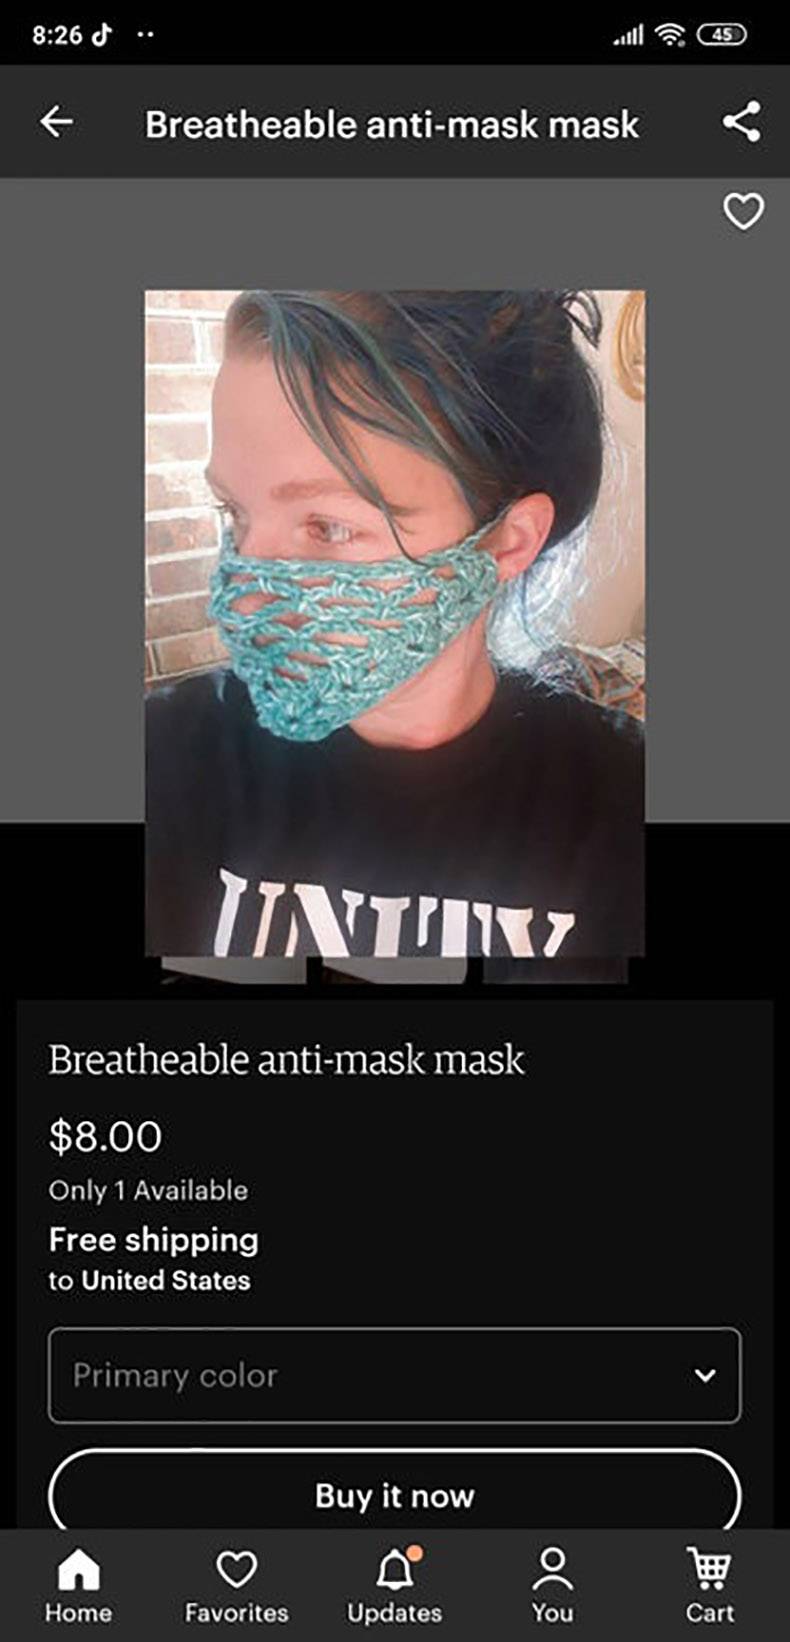 poster - 45 Breatheable antimask mask Breatheable antimask mask $8.00 Only 1 Available Free shipping to United States Primary color Buy it now Home Favorites Updates You Cart